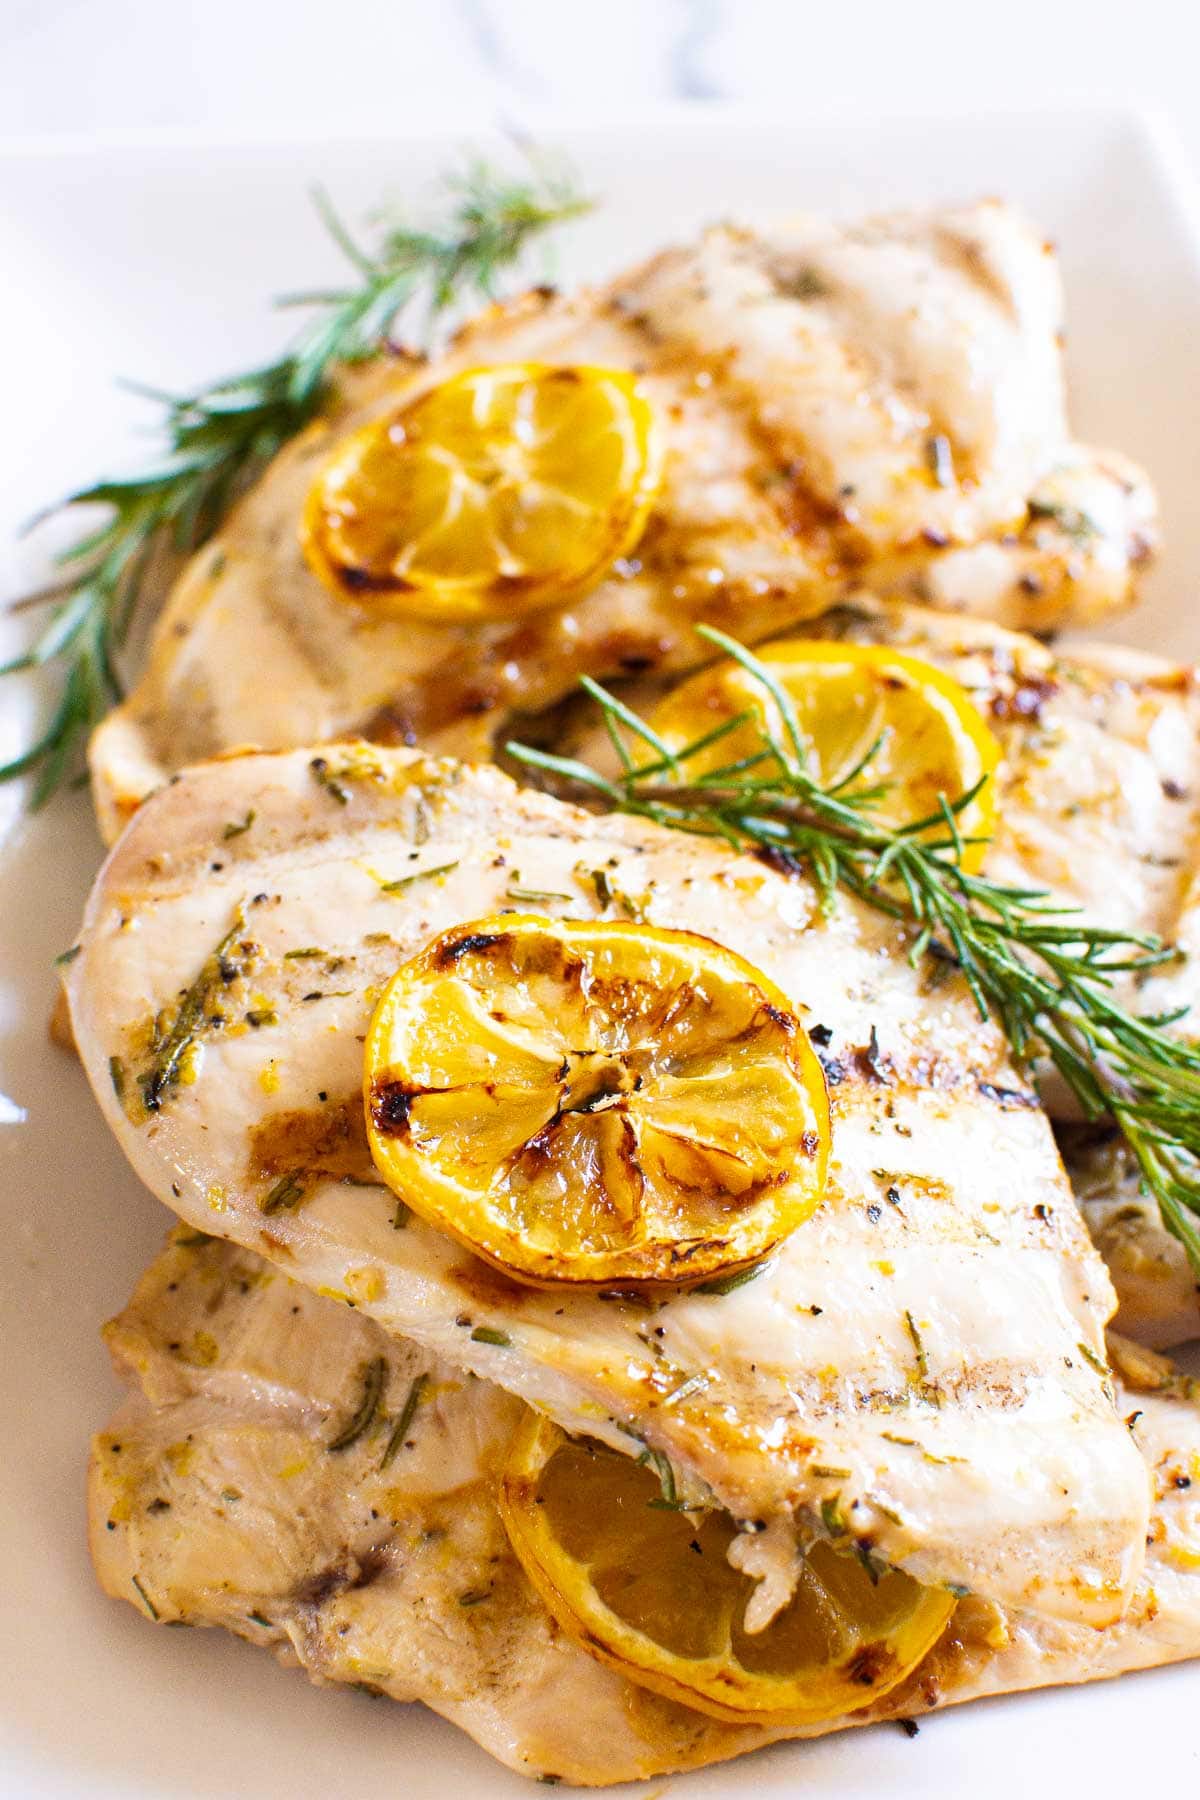 grilled lemon rosemary chicken breast in serving dish garnished with lemon and rosemary sprigs